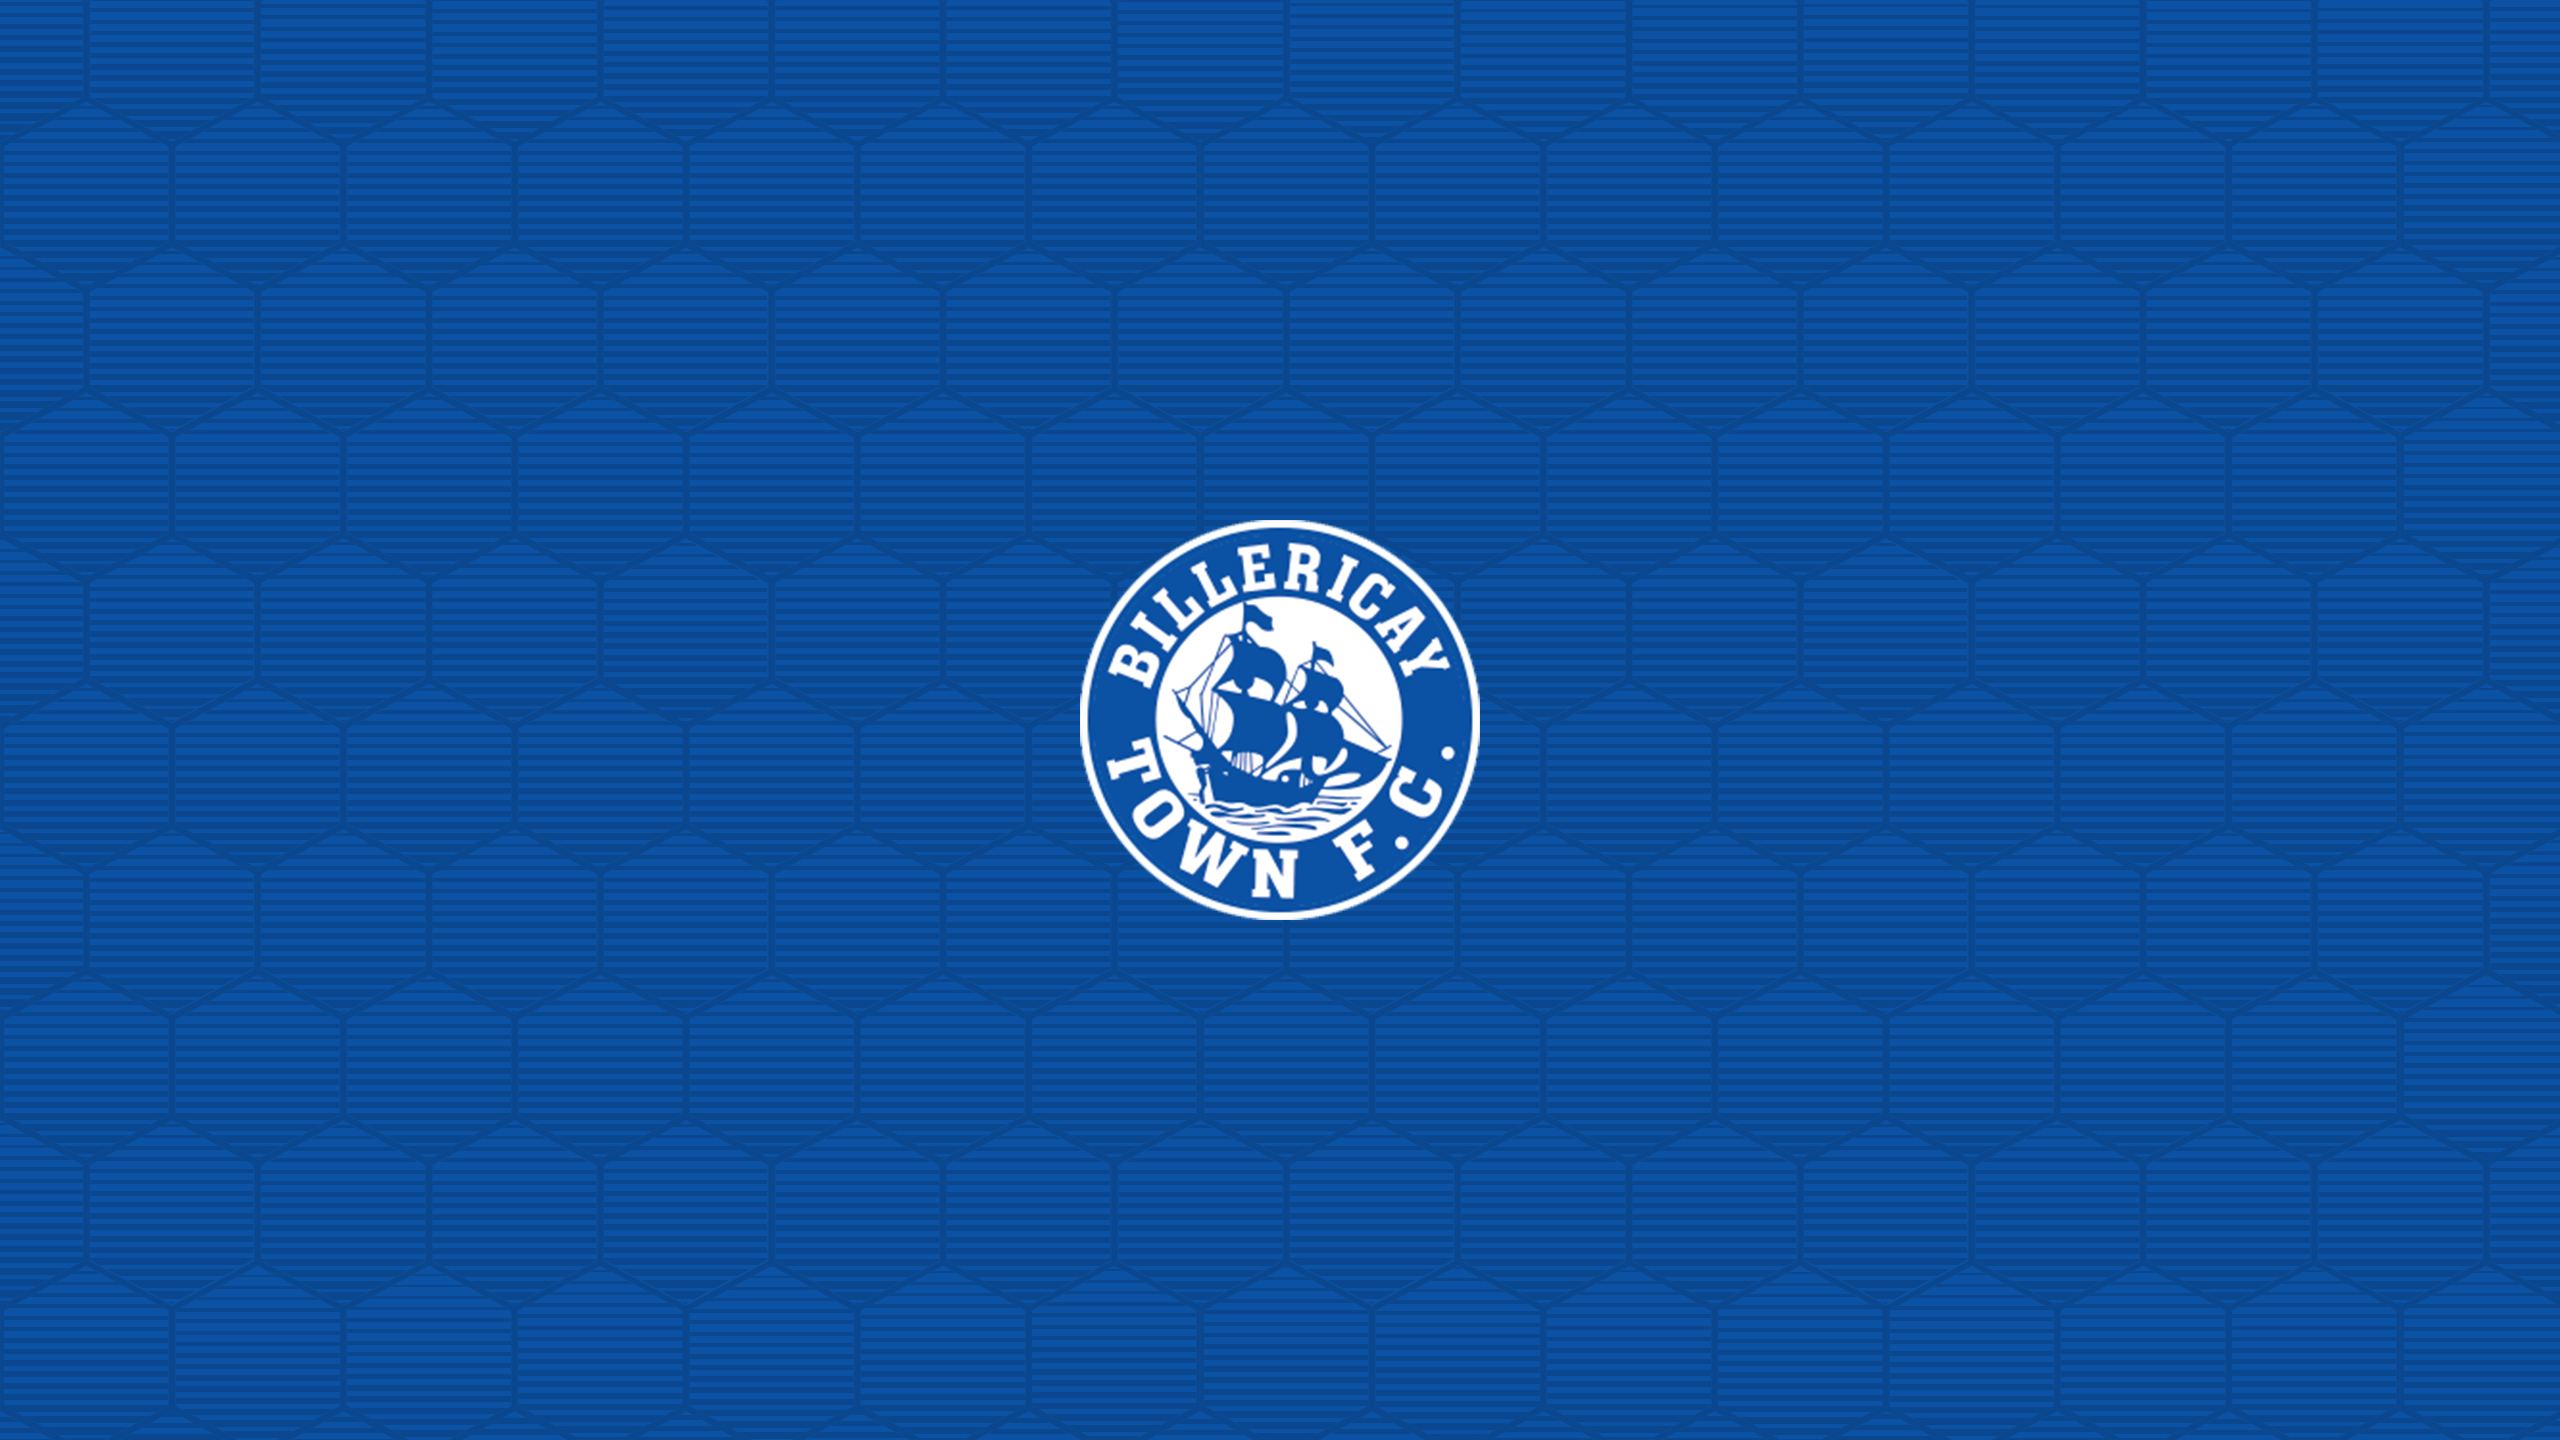 Sports Billericay Town F.C. HD Wallpaper | Background Image